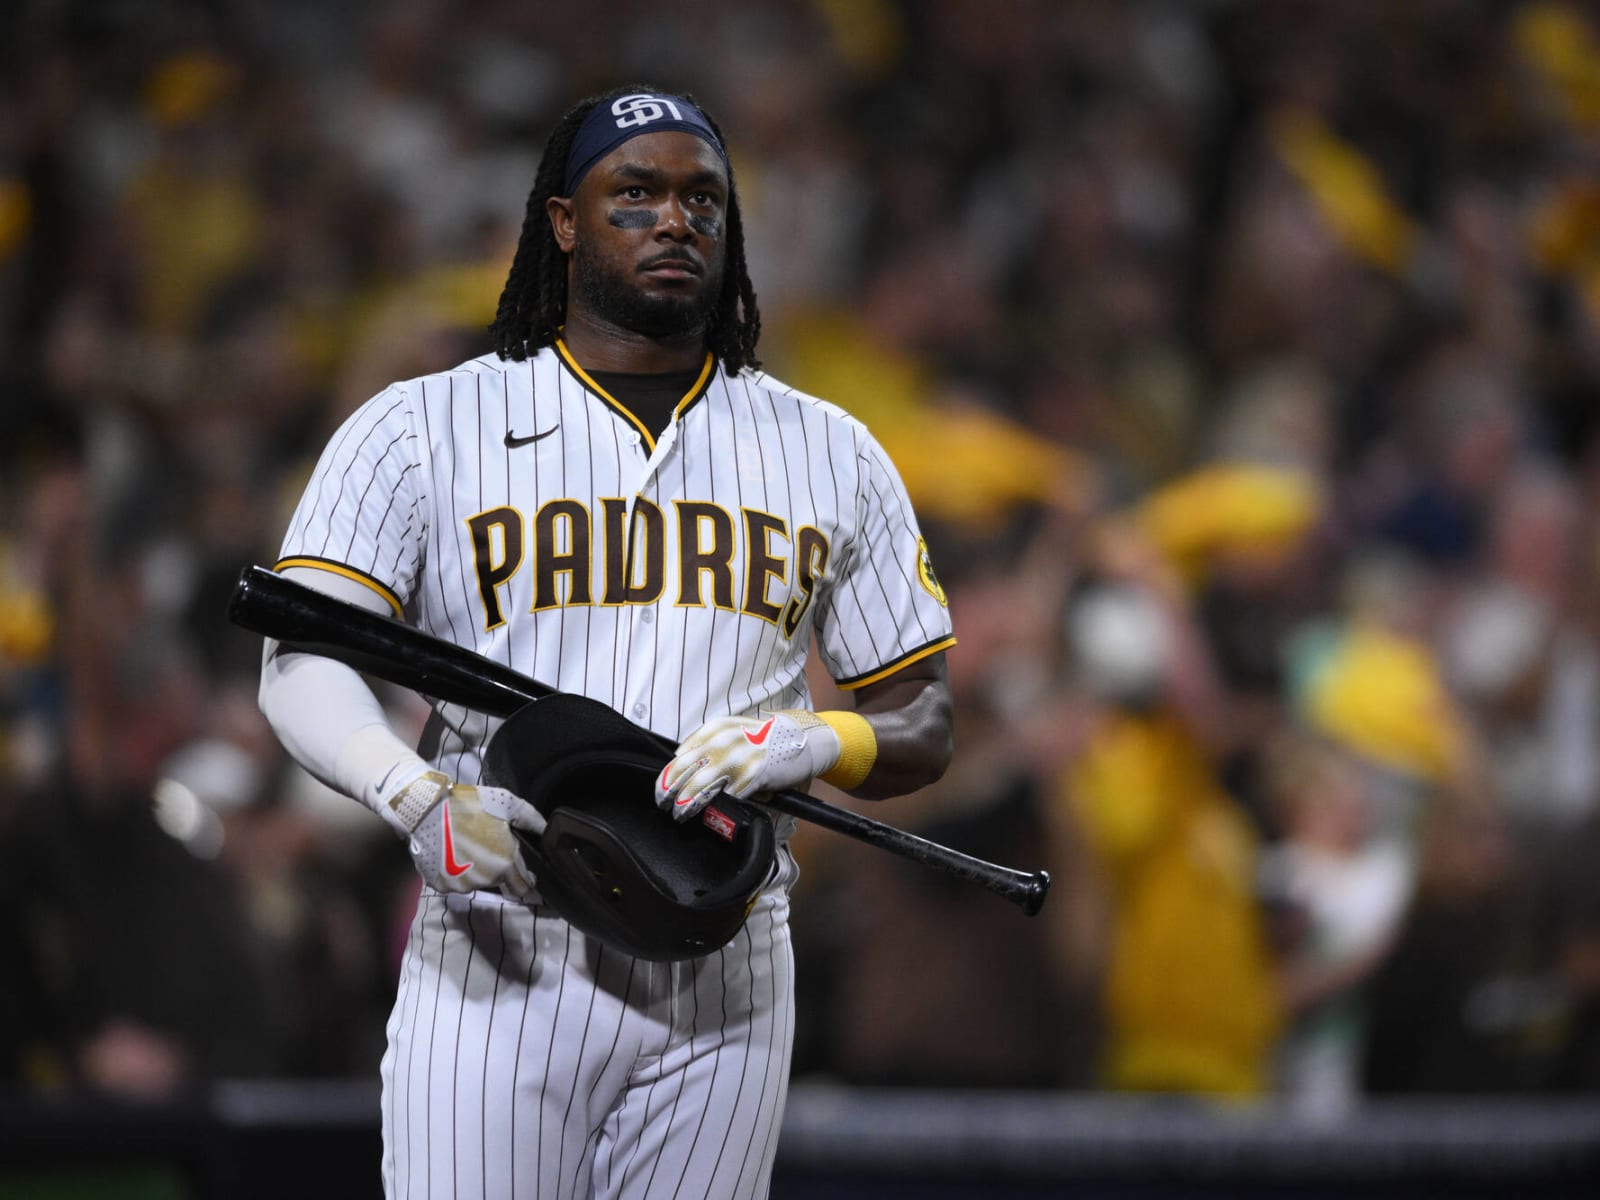 Amid the Nationals' deconstruction, Josh Bell has made a case for